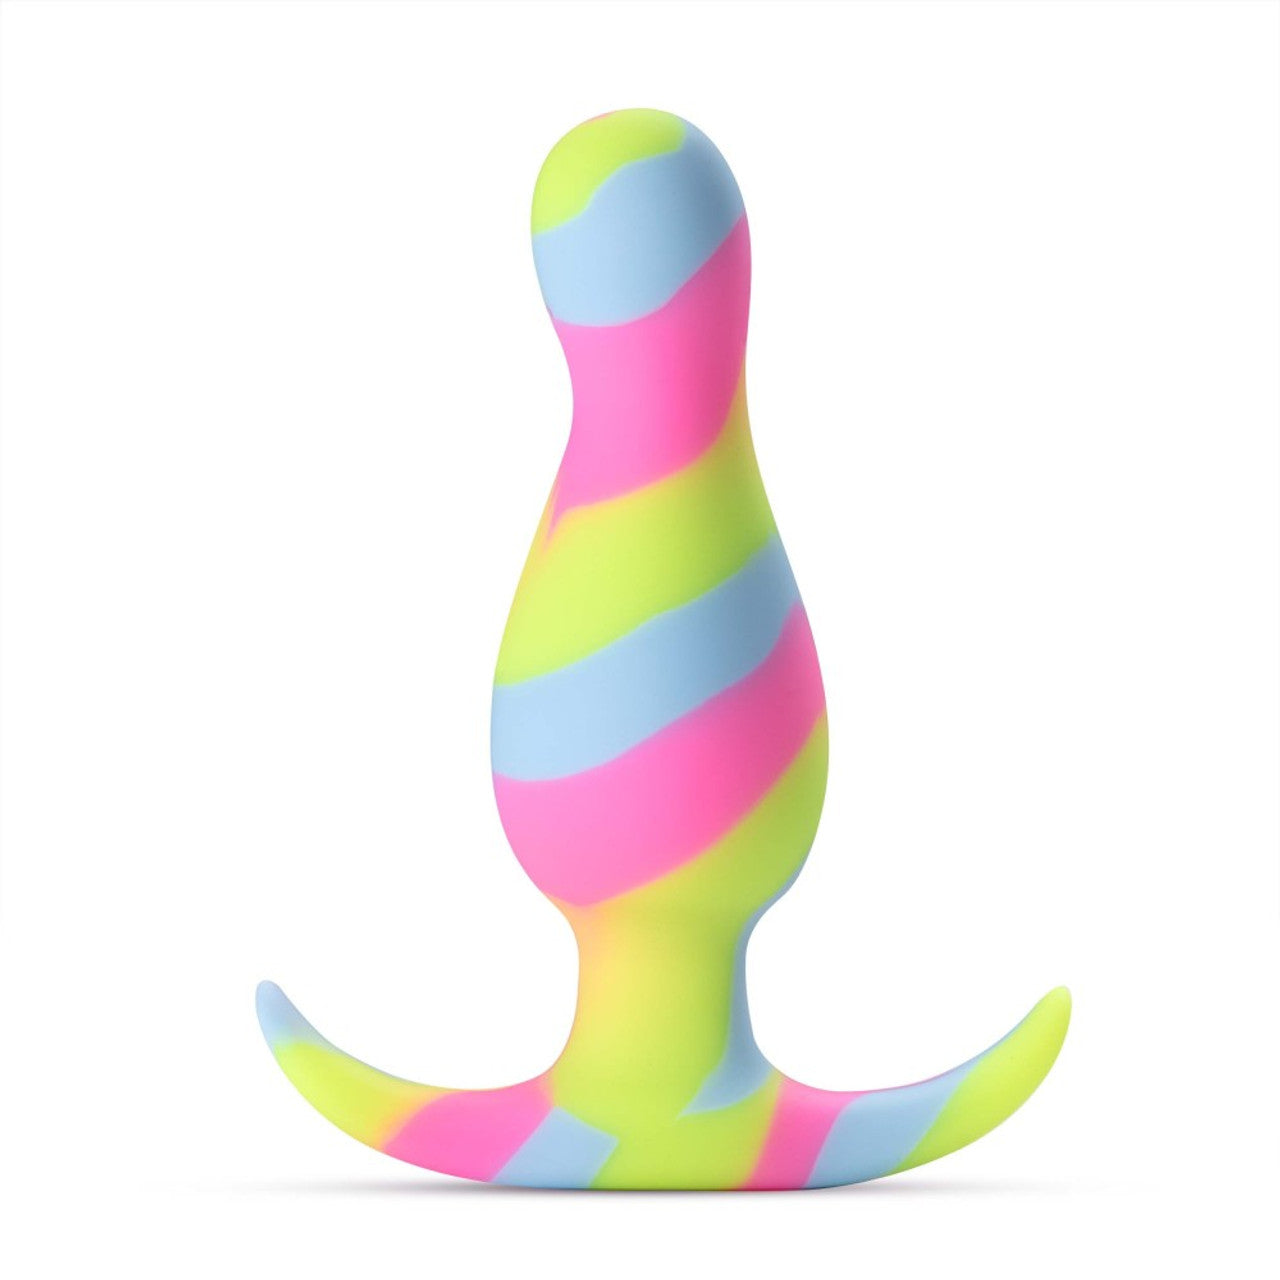 Avant Kaleido Silicone Plug - Lime - Thorn & Feather Sex Toy Canada